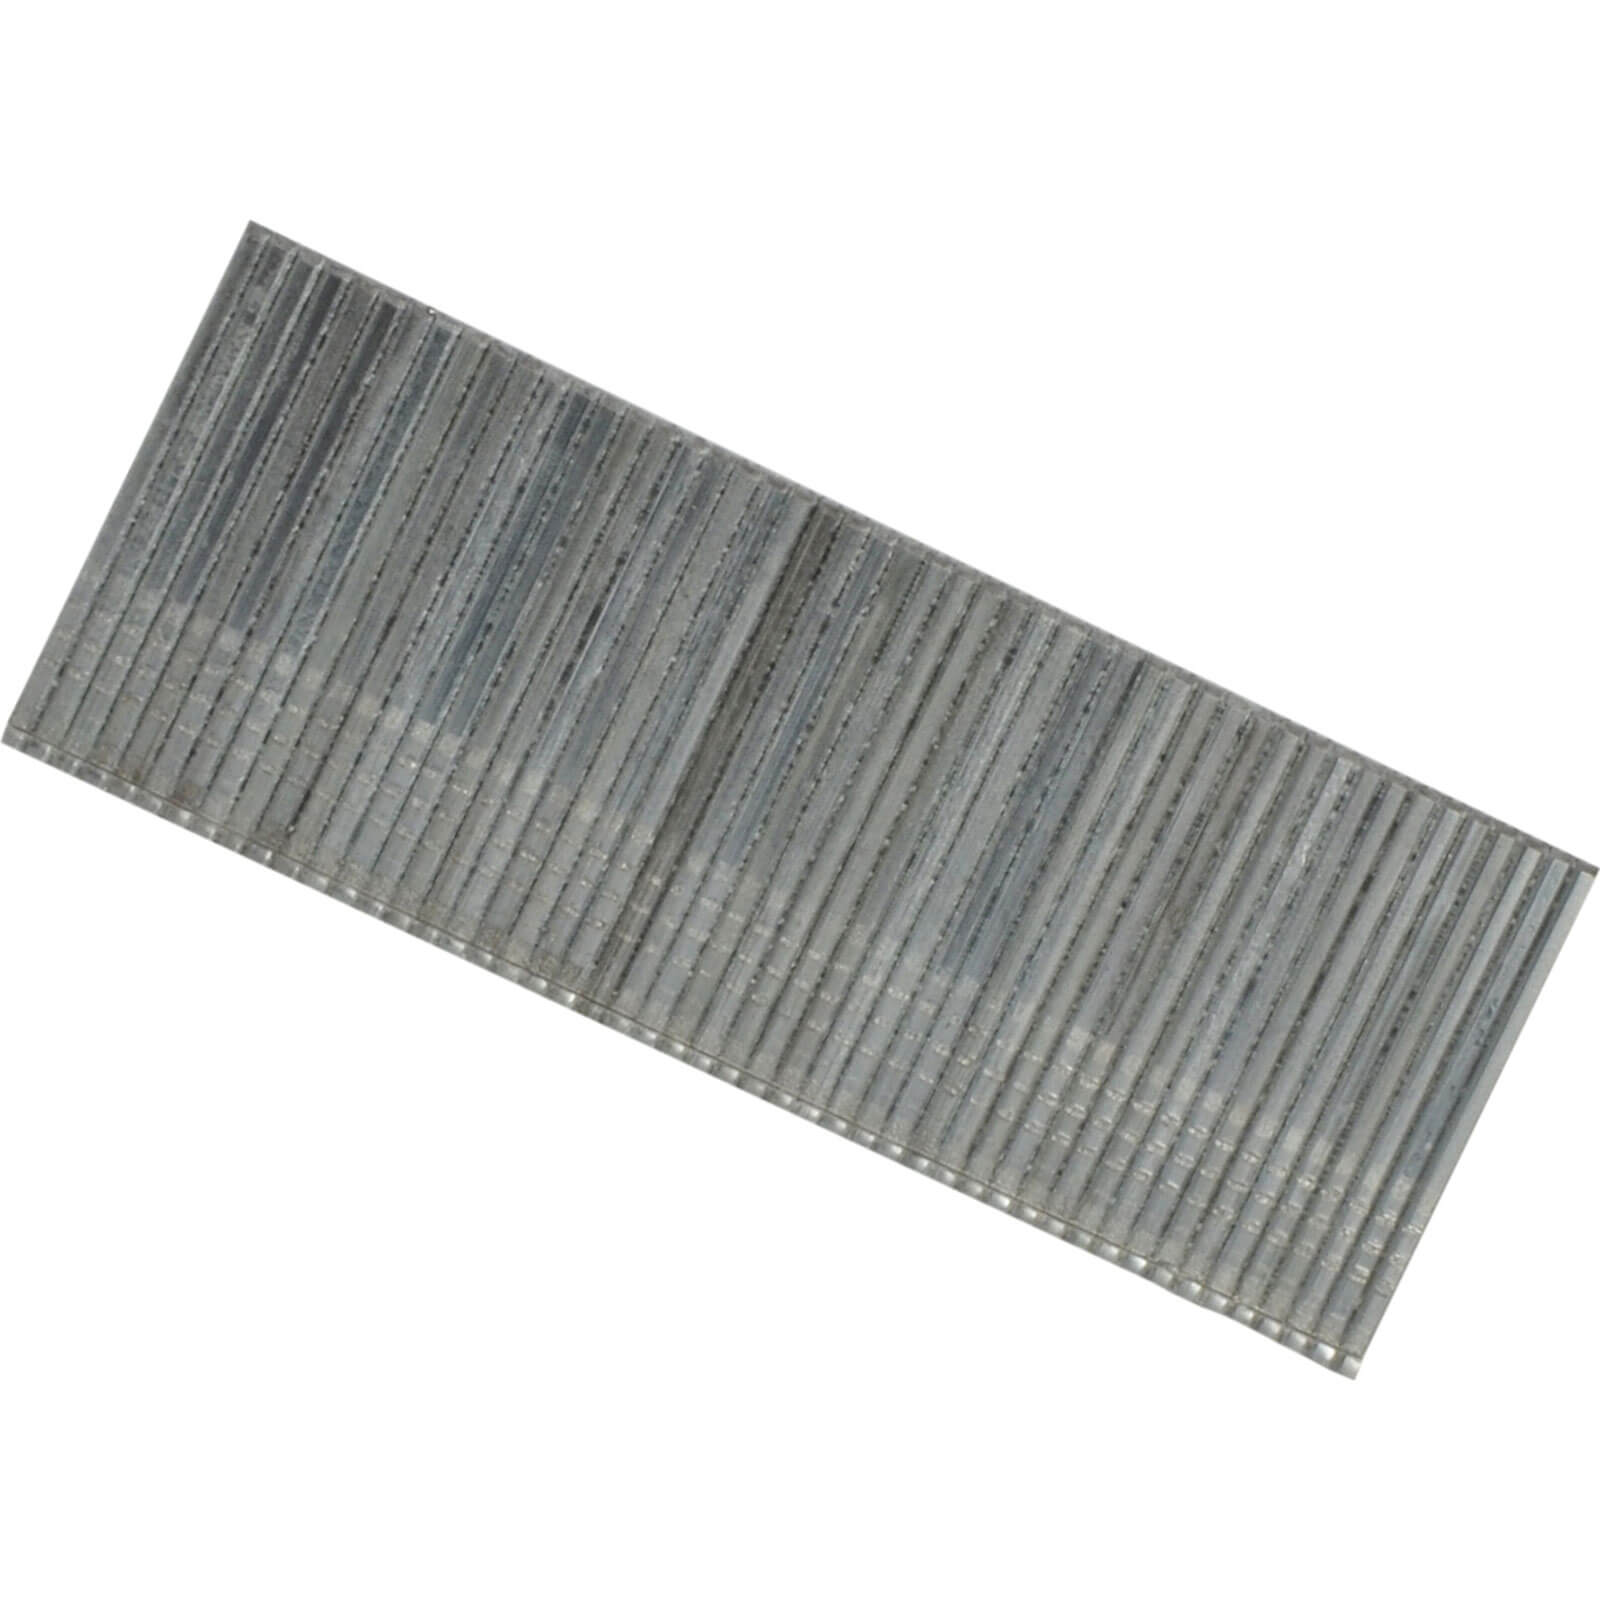 Photo of Bostitch 16 Gauge Straight Finish Nails 38mm Pack Of 1000